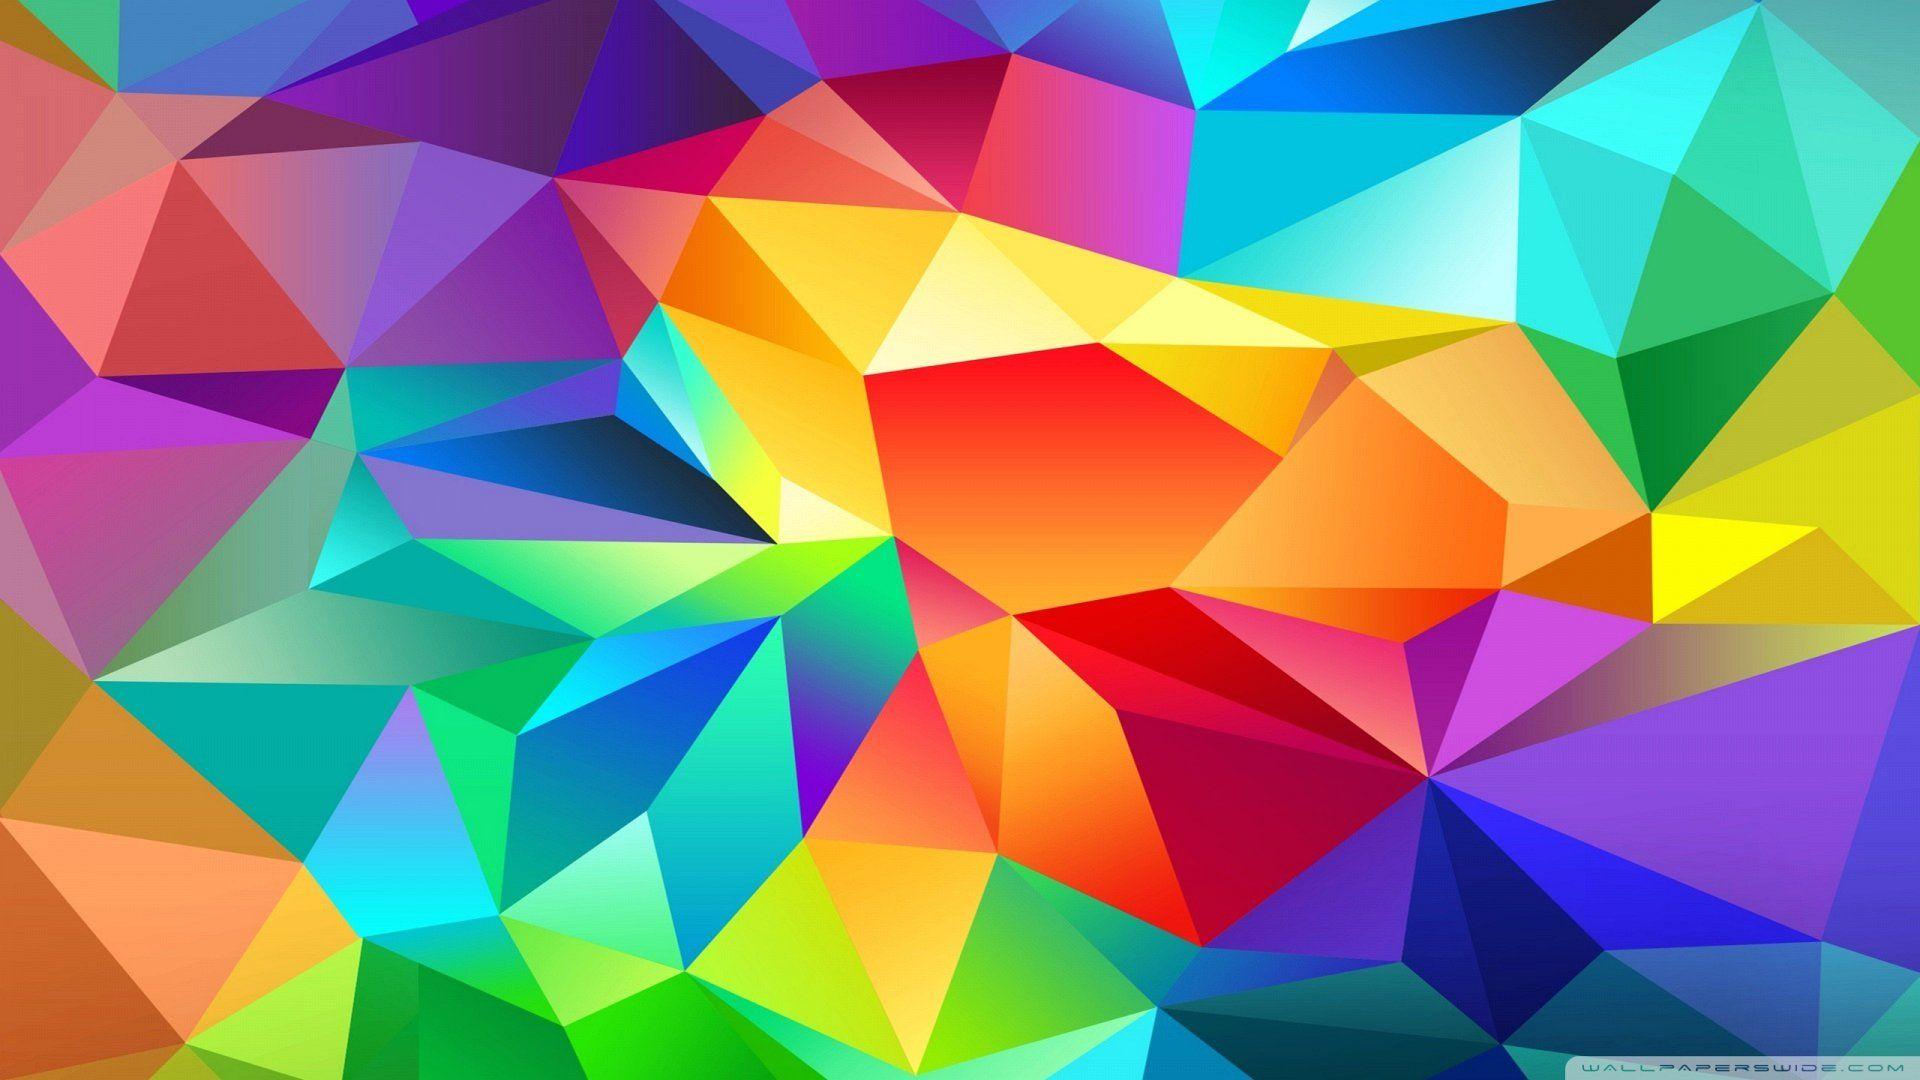 Wallpaper Polygonal Colorful Abstract 1920 X 1080 Full HD x